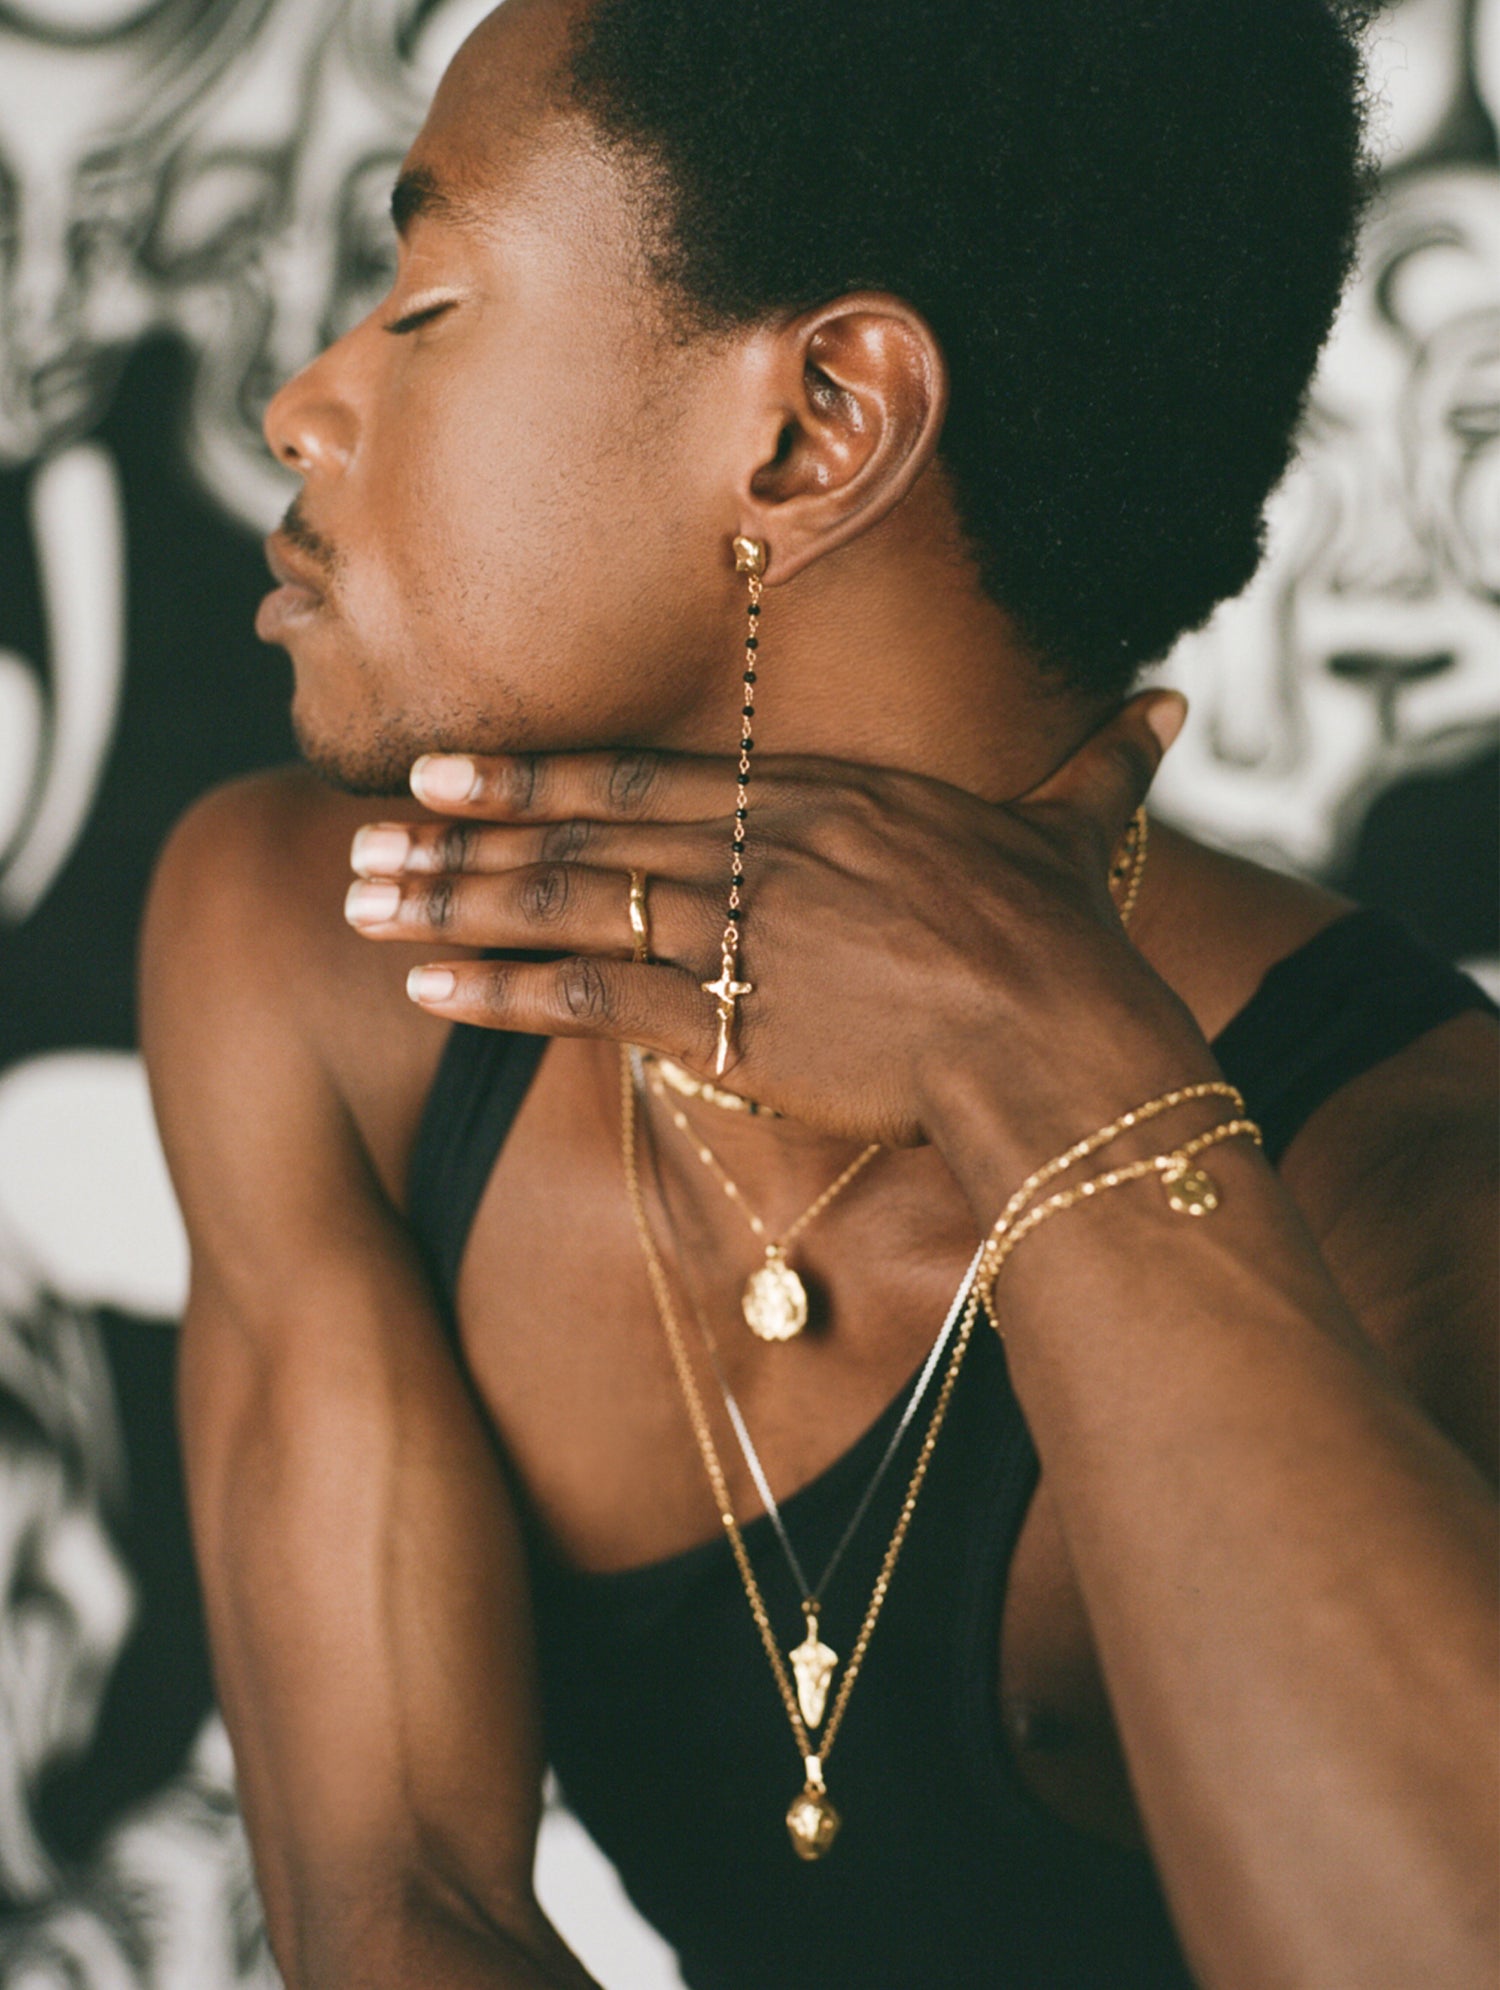 Model wearing layered necklaces, gold bracelet and crucifix earring